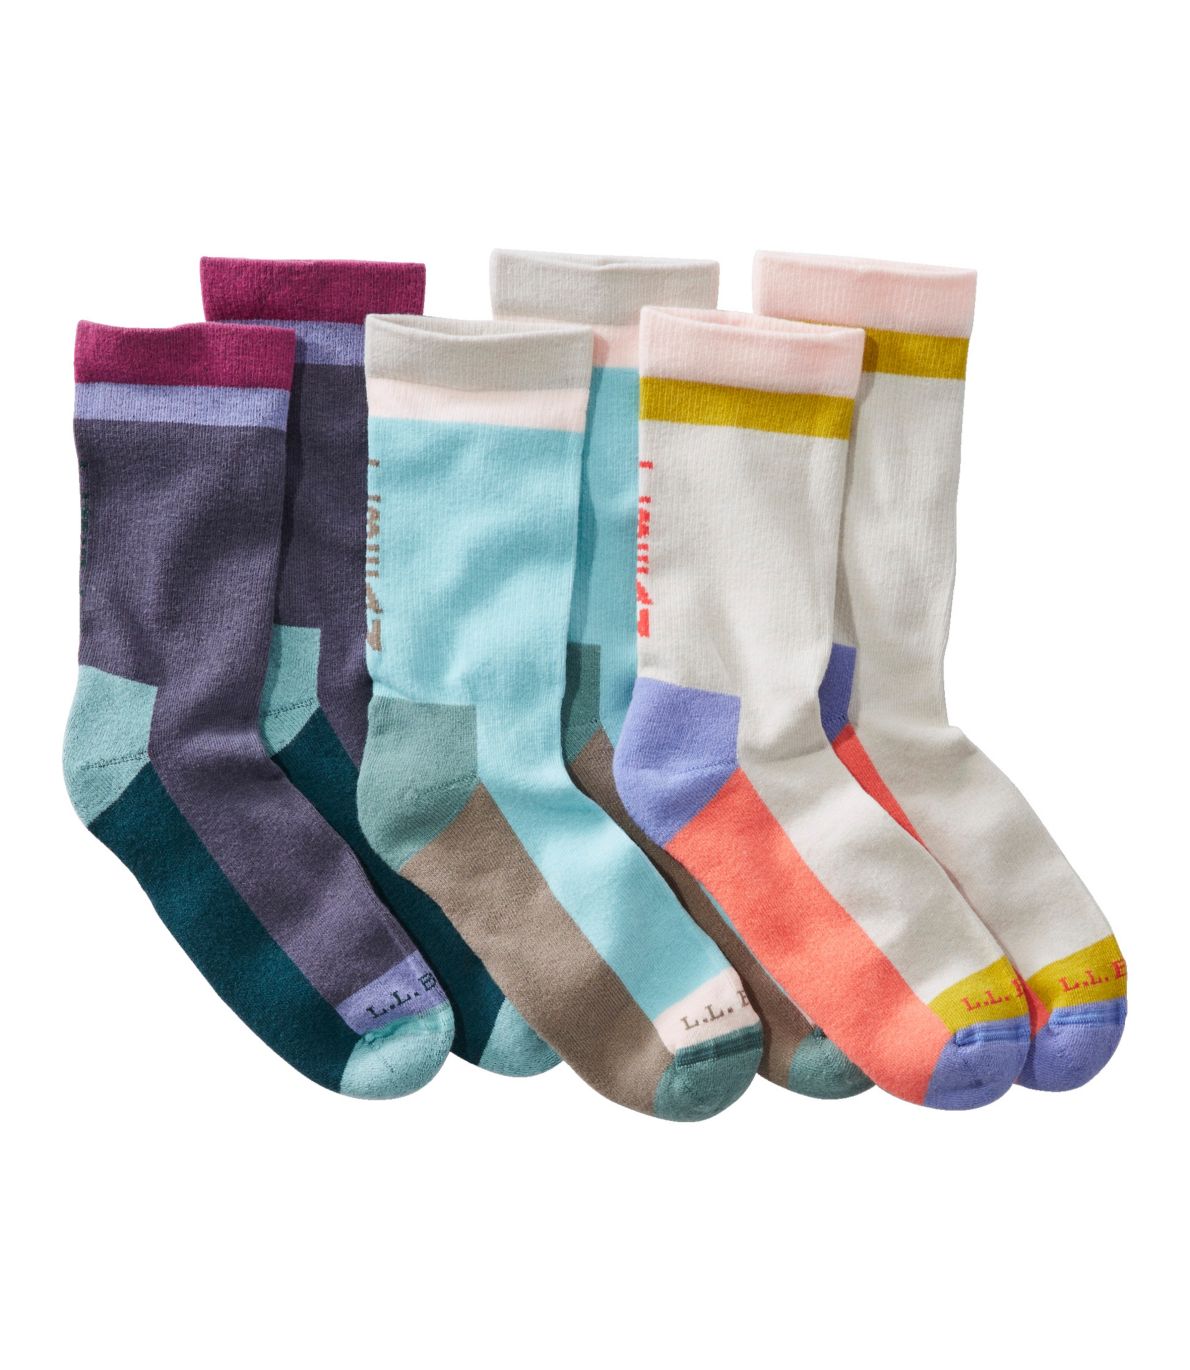 Adults' Wicked Soft Cotton Socks Gift Set, 3 Pairs